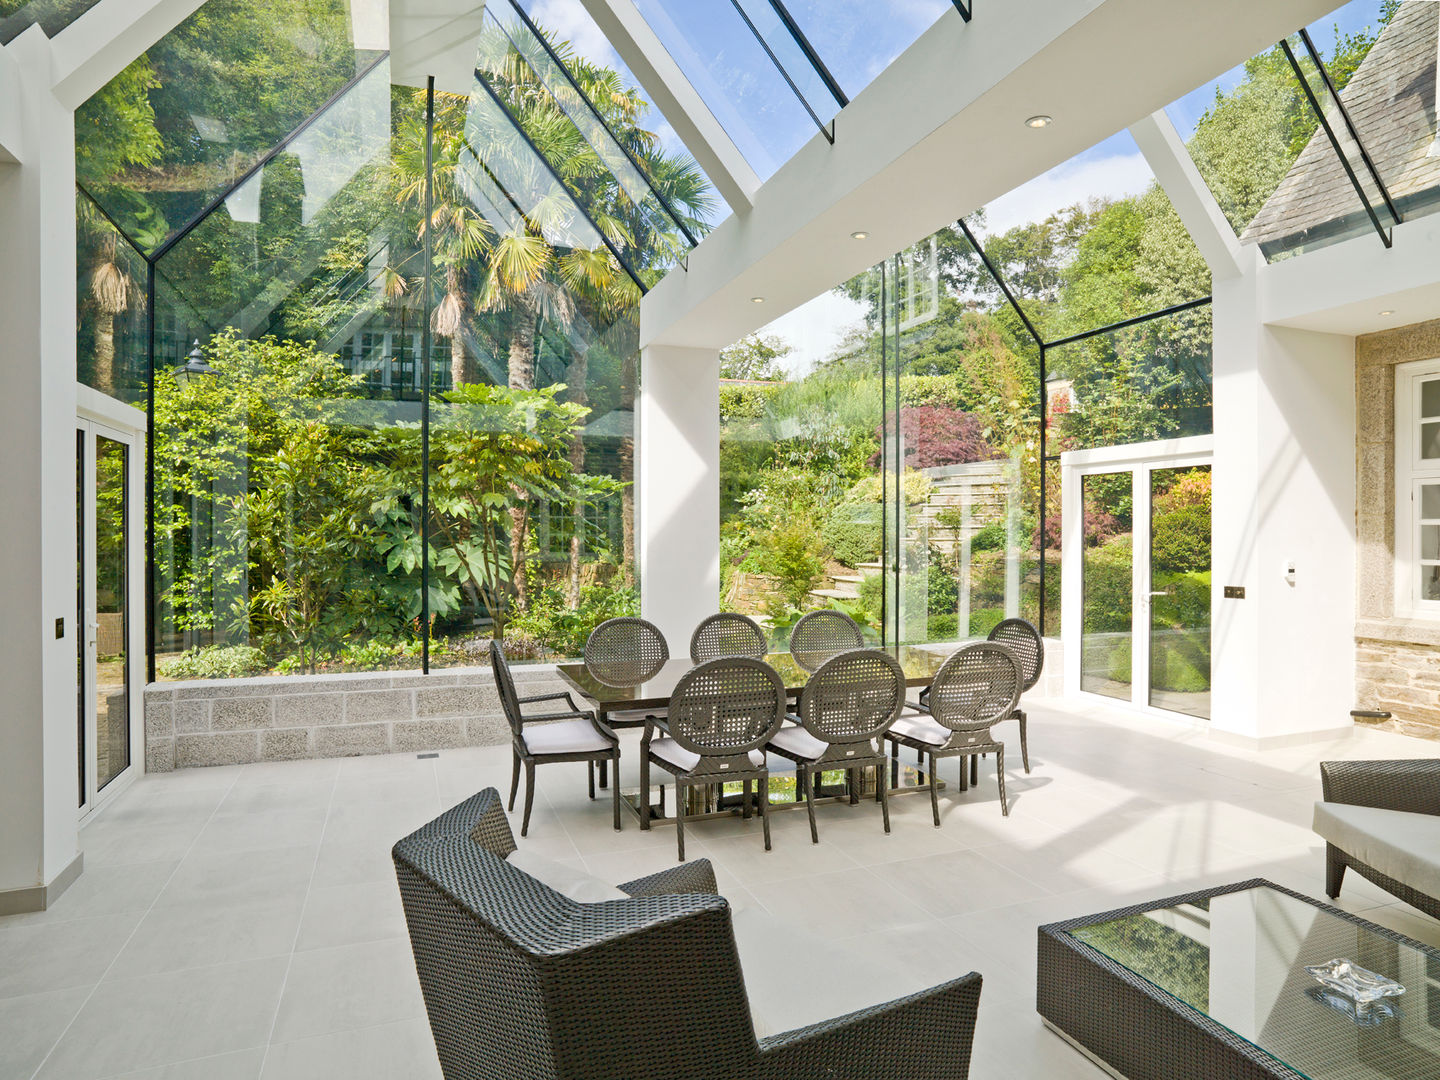 Structural Glass Conservatory, Cornwall homify Moderne serres Glas